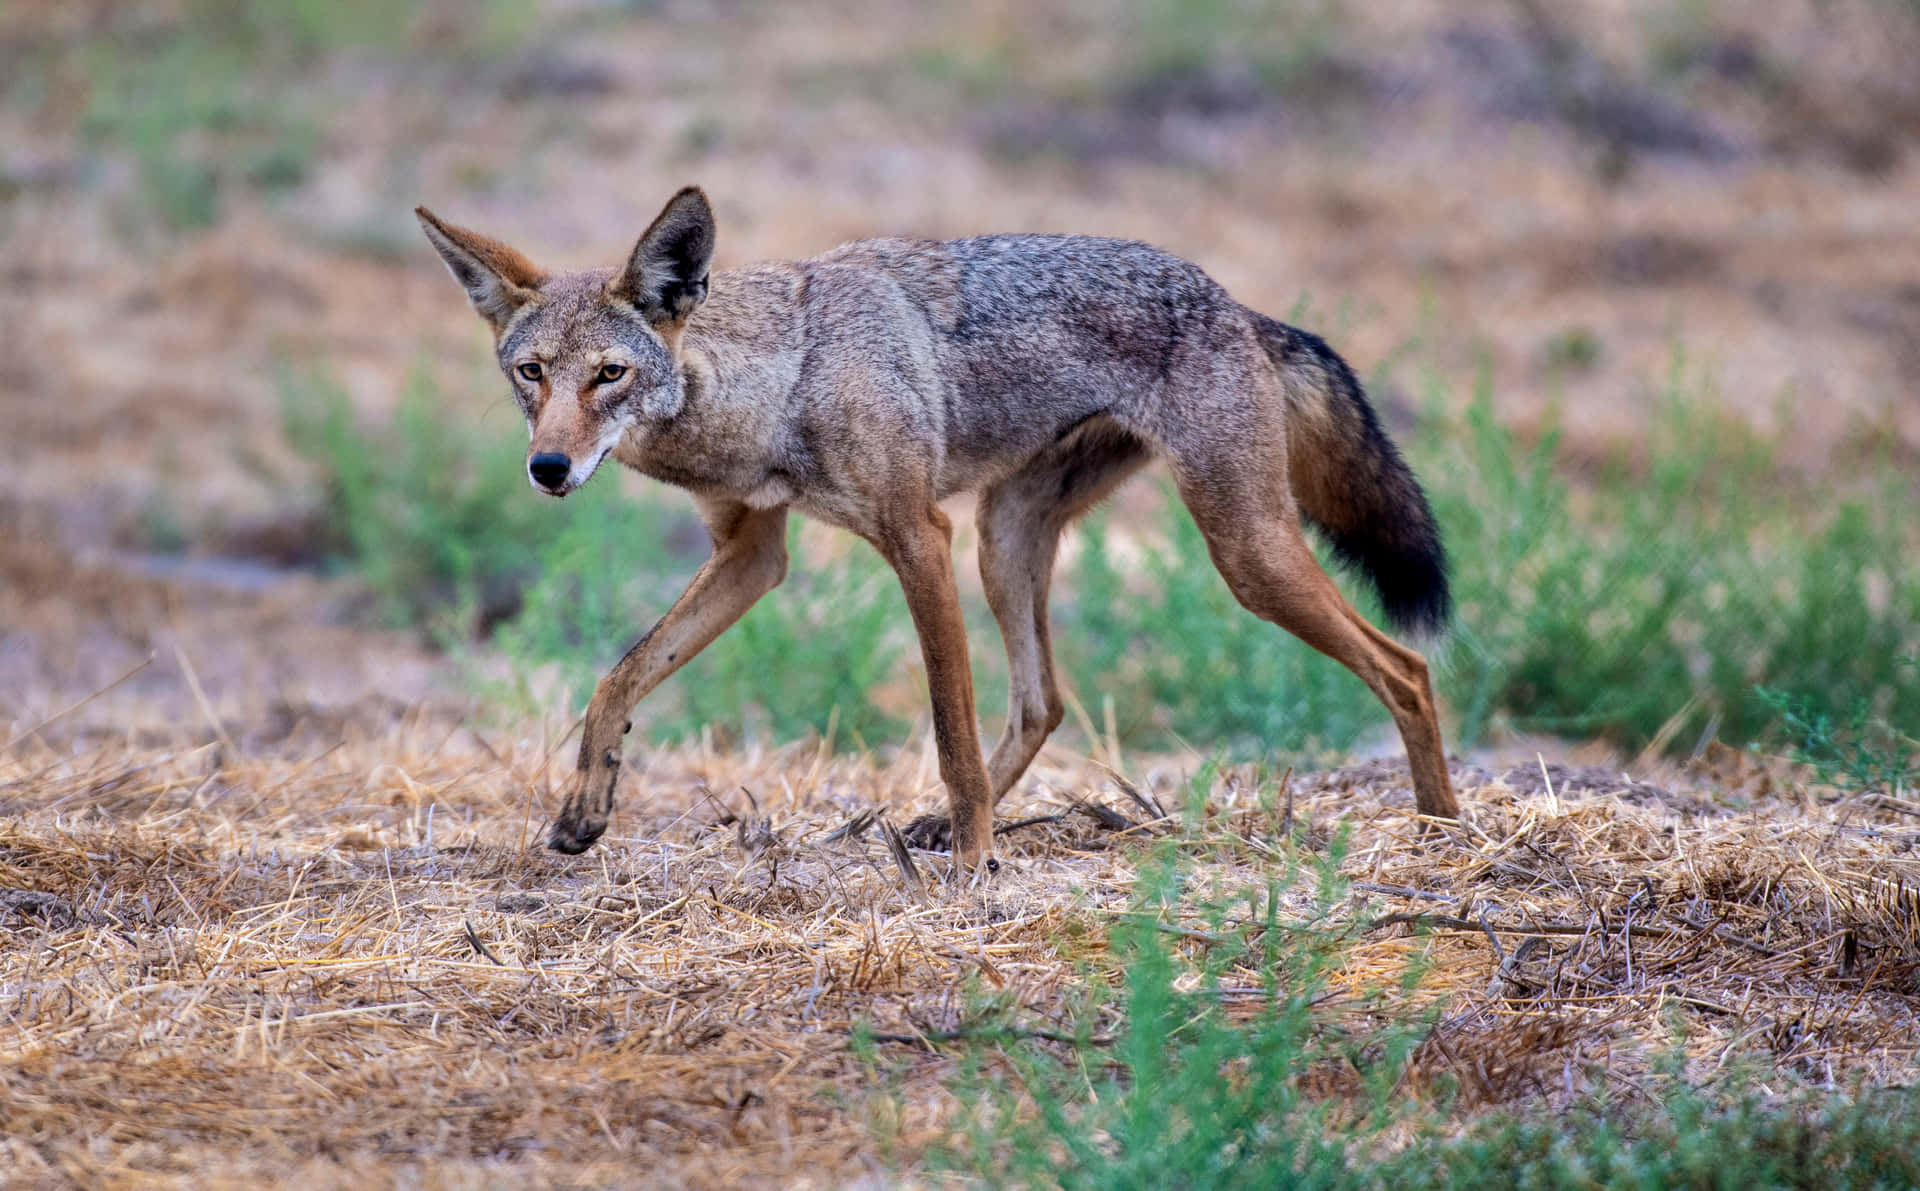 A coyote stands alert, surrounded by a desert landscape